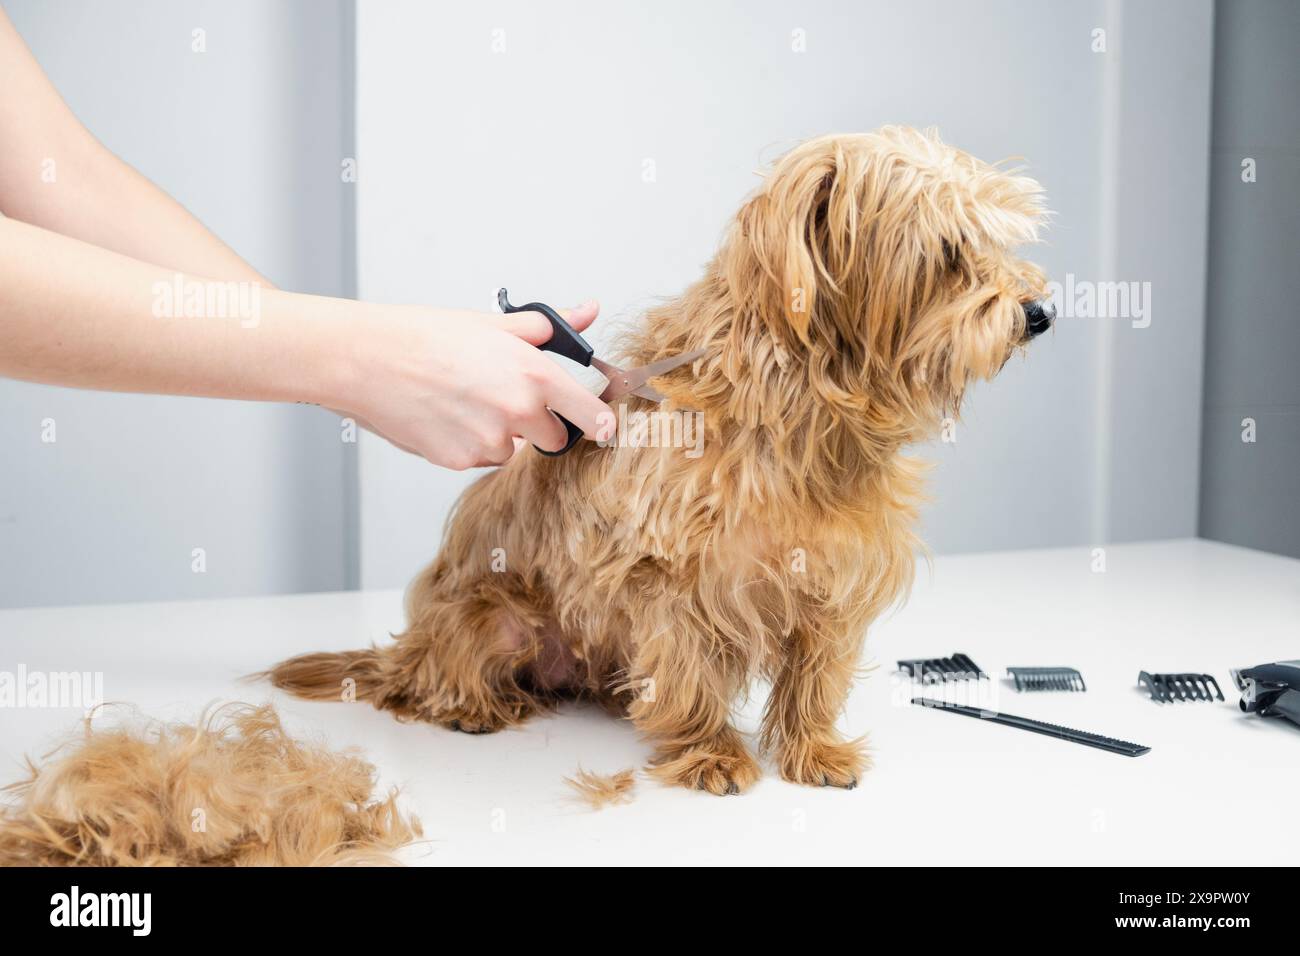 A young dog stylist cuts the hair of a golden terrier with scissords. The dog looks the other way very relaxed Stock Photo